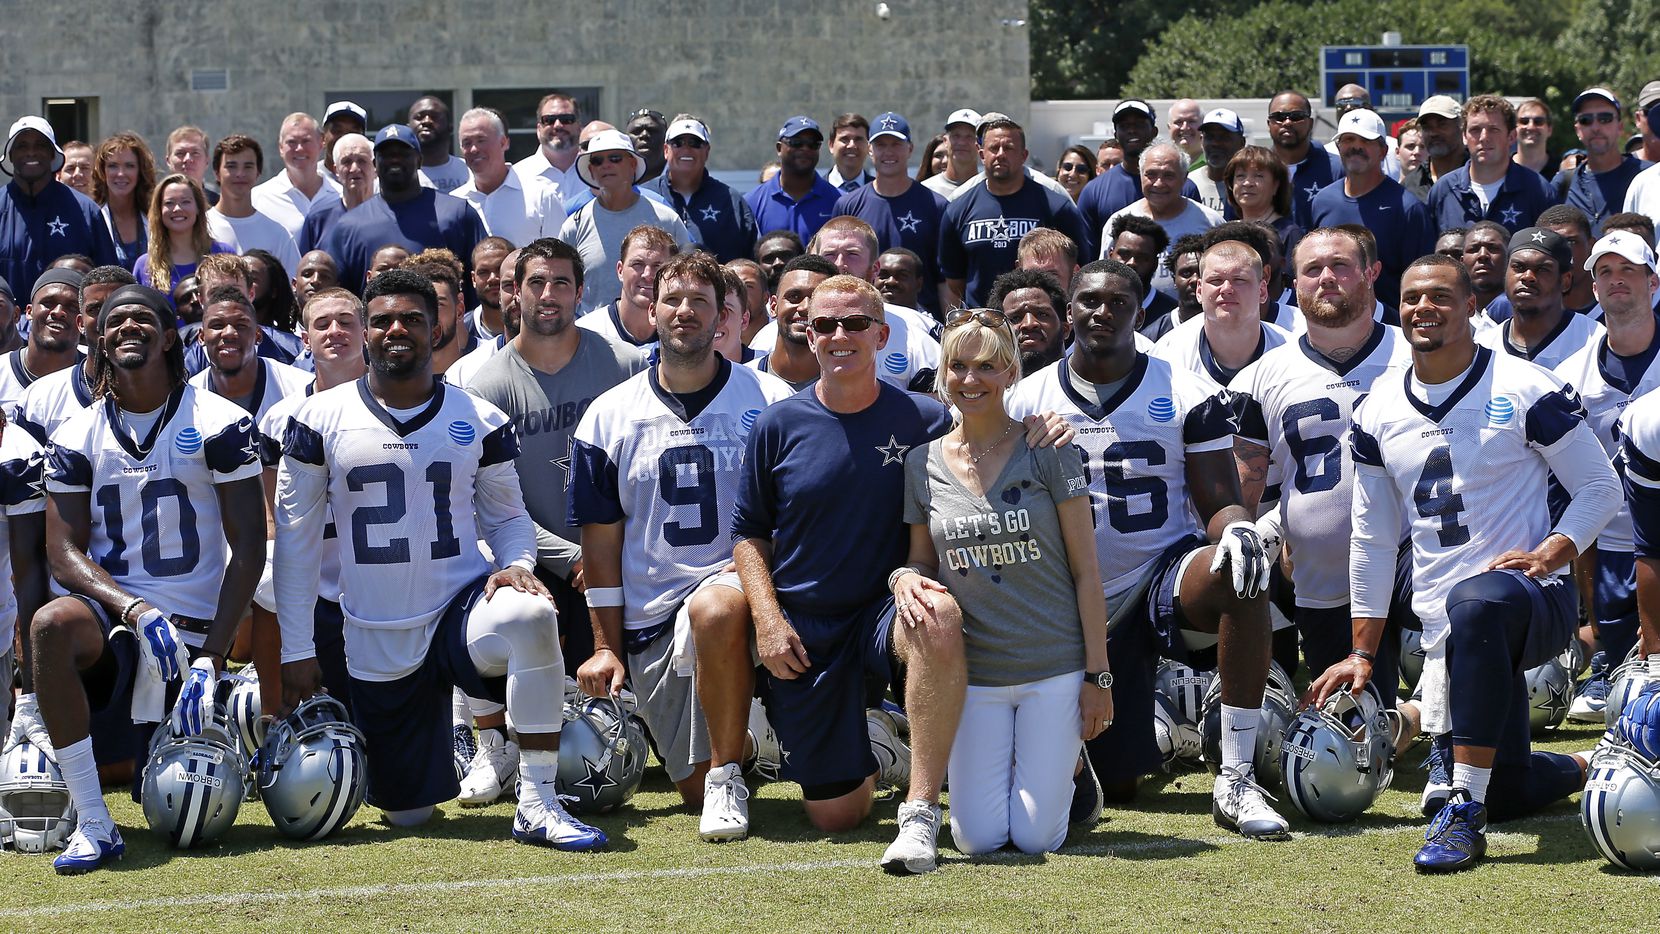 Jason And His Wife With The Dallas Cowboys Football Team